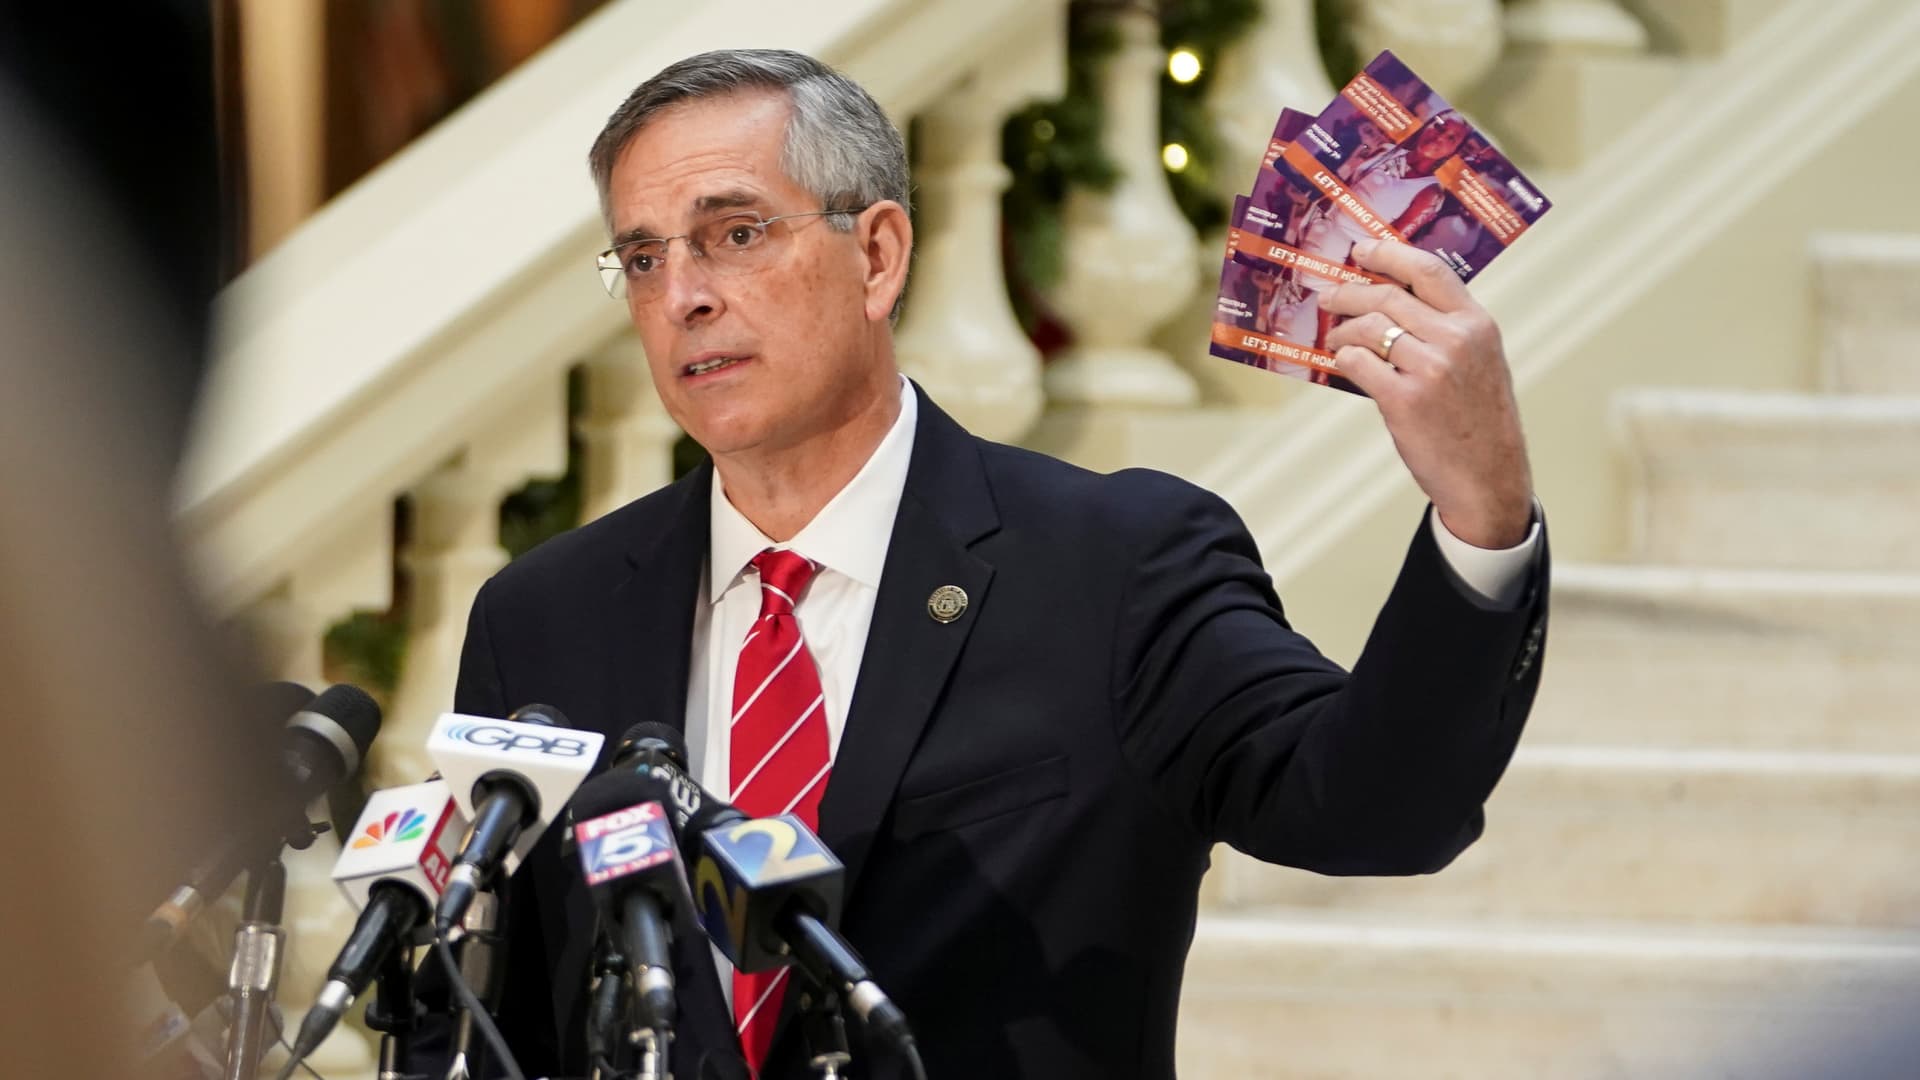 Georgia's Secretary of State Brad Raffensperger holds up election mail that he said arrived for his son, who is deceased, during a news conference on election results in Atlanta, Georgia, U.S., December 2, 2020.